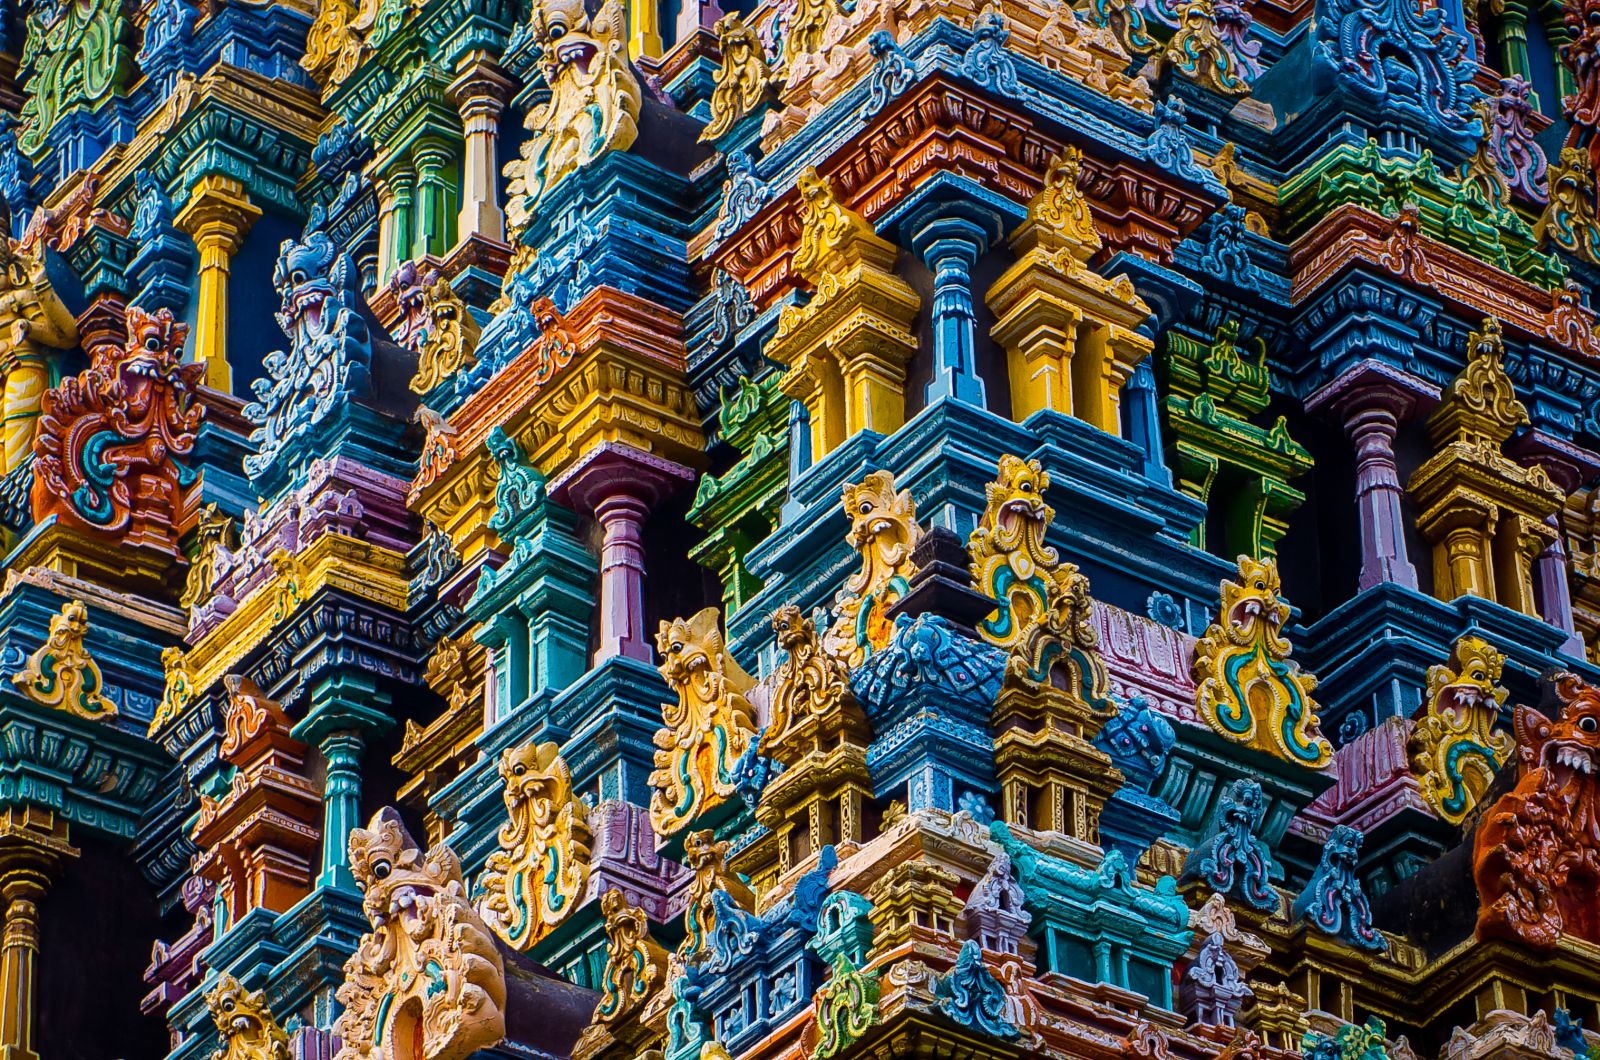 Detail of the intricate carvings on the pillars of Meenakshi temple in Madurai India